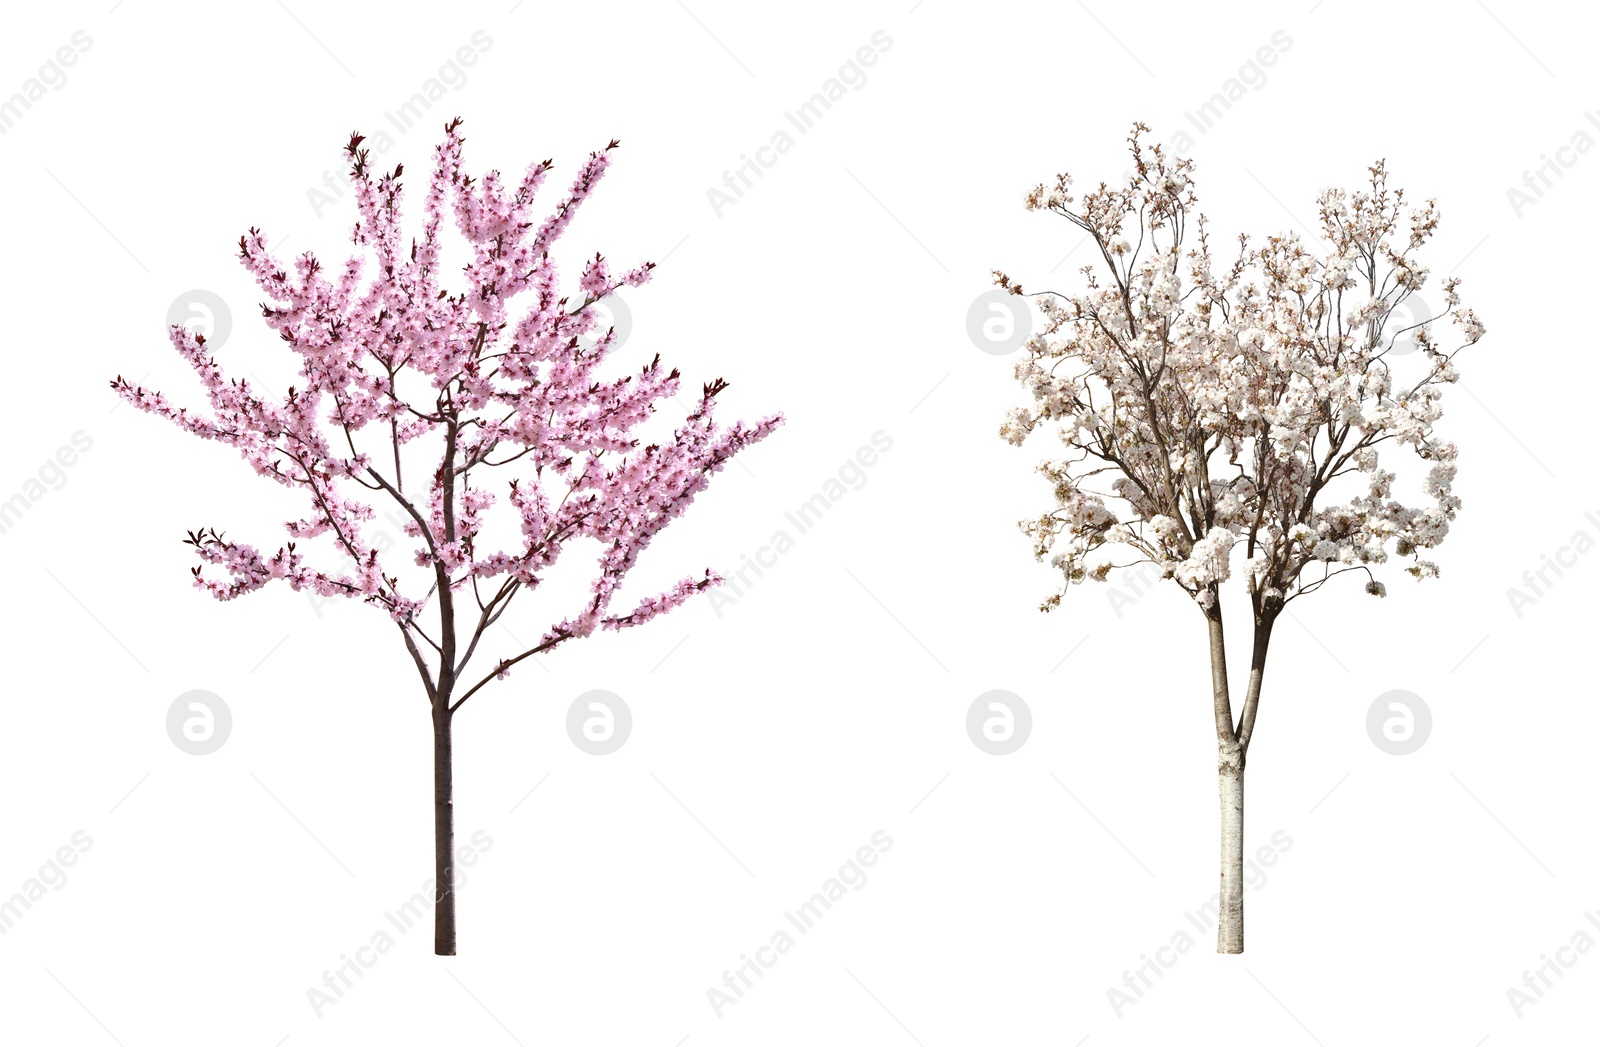 Image of Beautiful blossoming sakura trees on white background, collage 